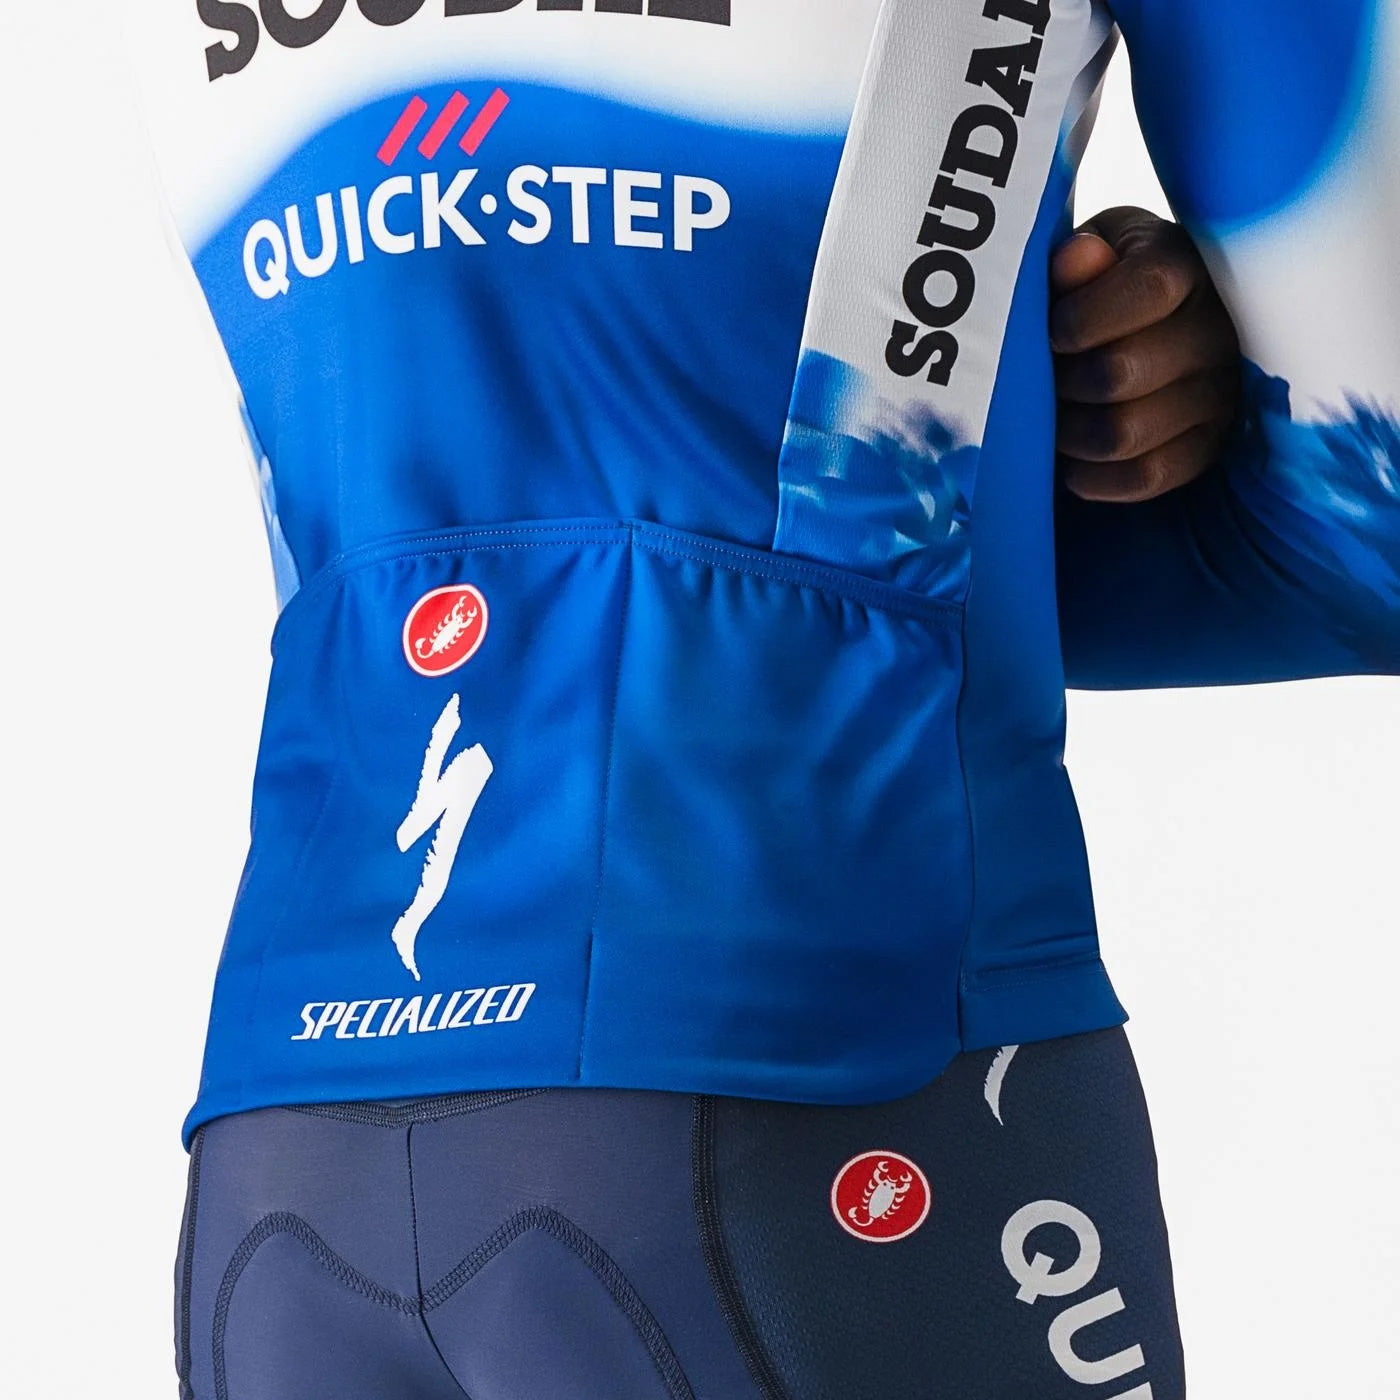 Castelli Soudal Quick-Step 2024 Thermal long sleeve jersey